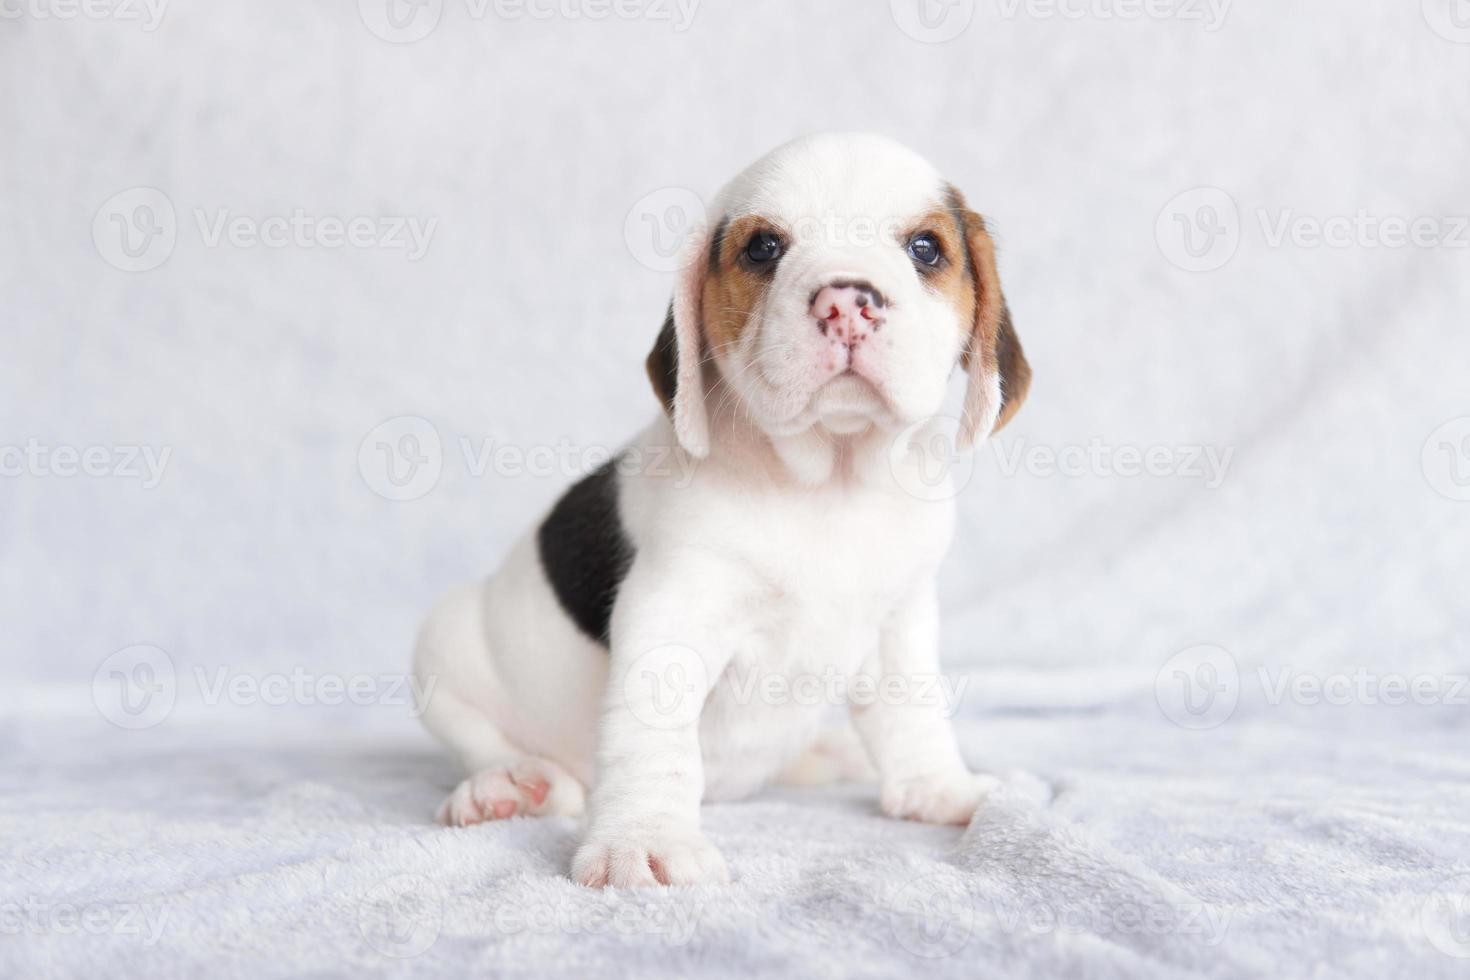 The general appearance of the beagle resembles a miniature Foxhound.The beagle was developed primarily for hunting hare. Possessing a great sense of smell and superior tracking instincts. photo